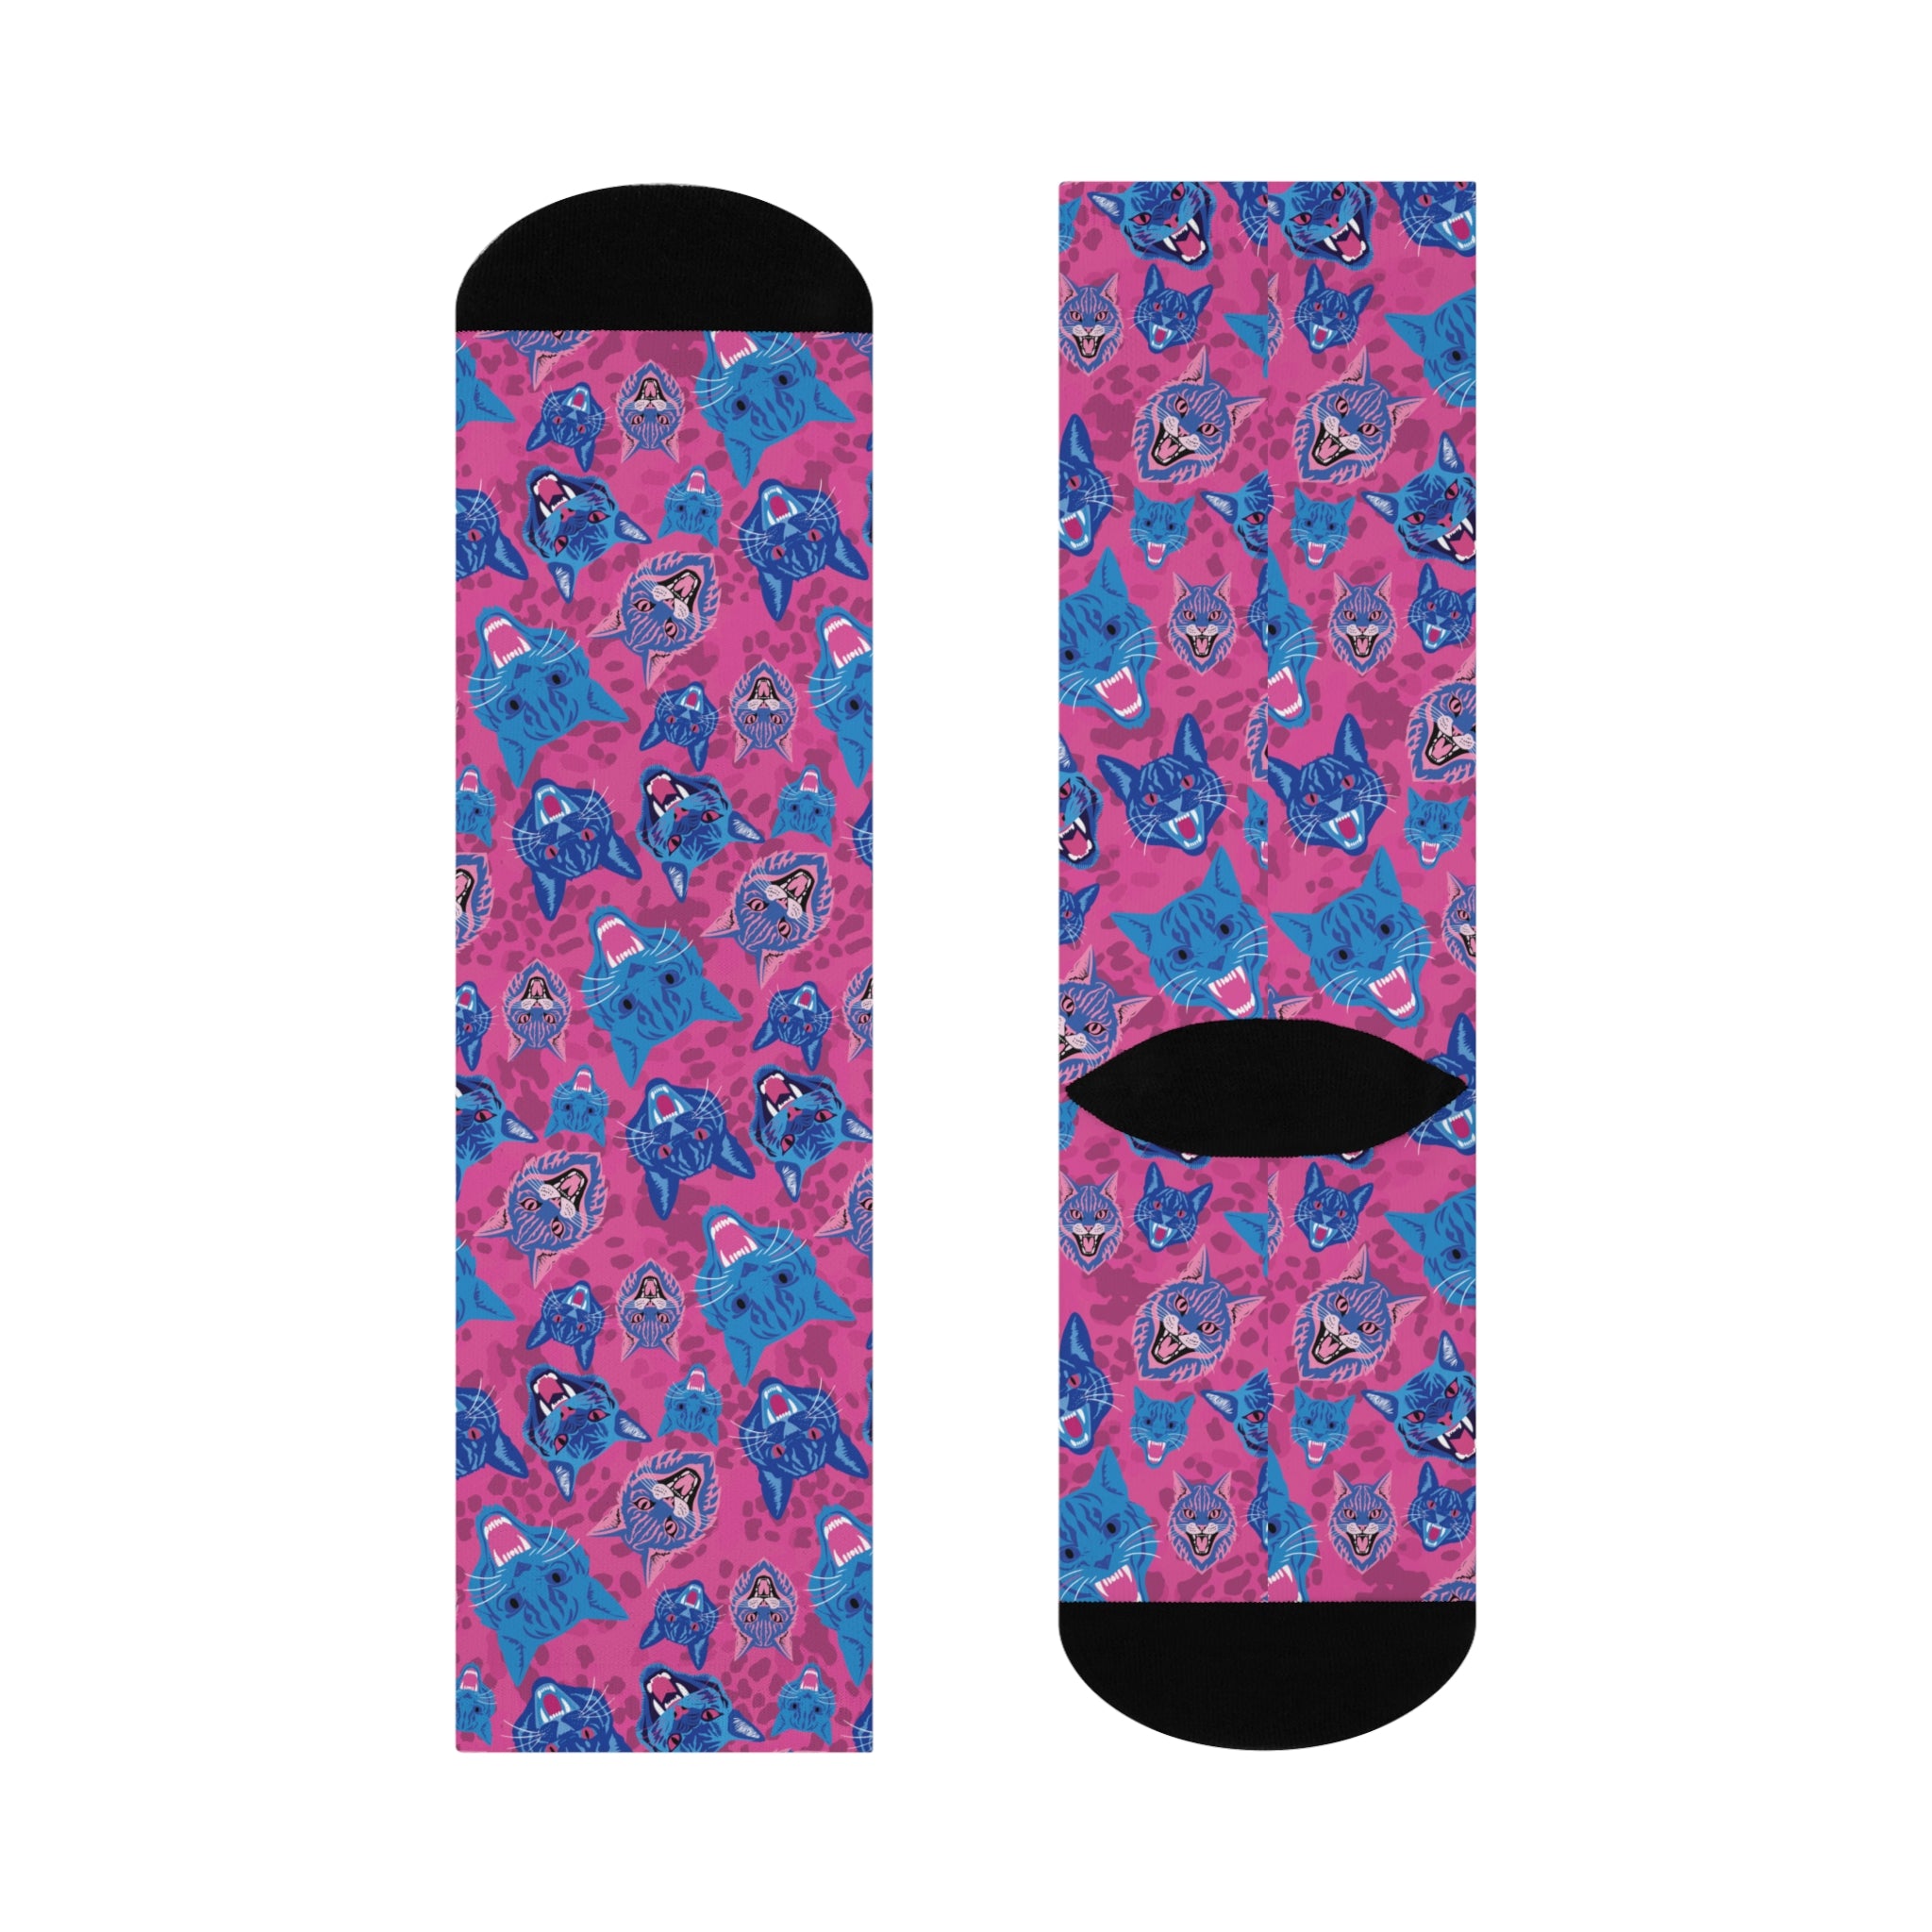 Fun and playful socks adorned with vibrant tiger head motifs on a pink background, with black heels and toes, ideal for animal lovers and those who enjoy unique designs